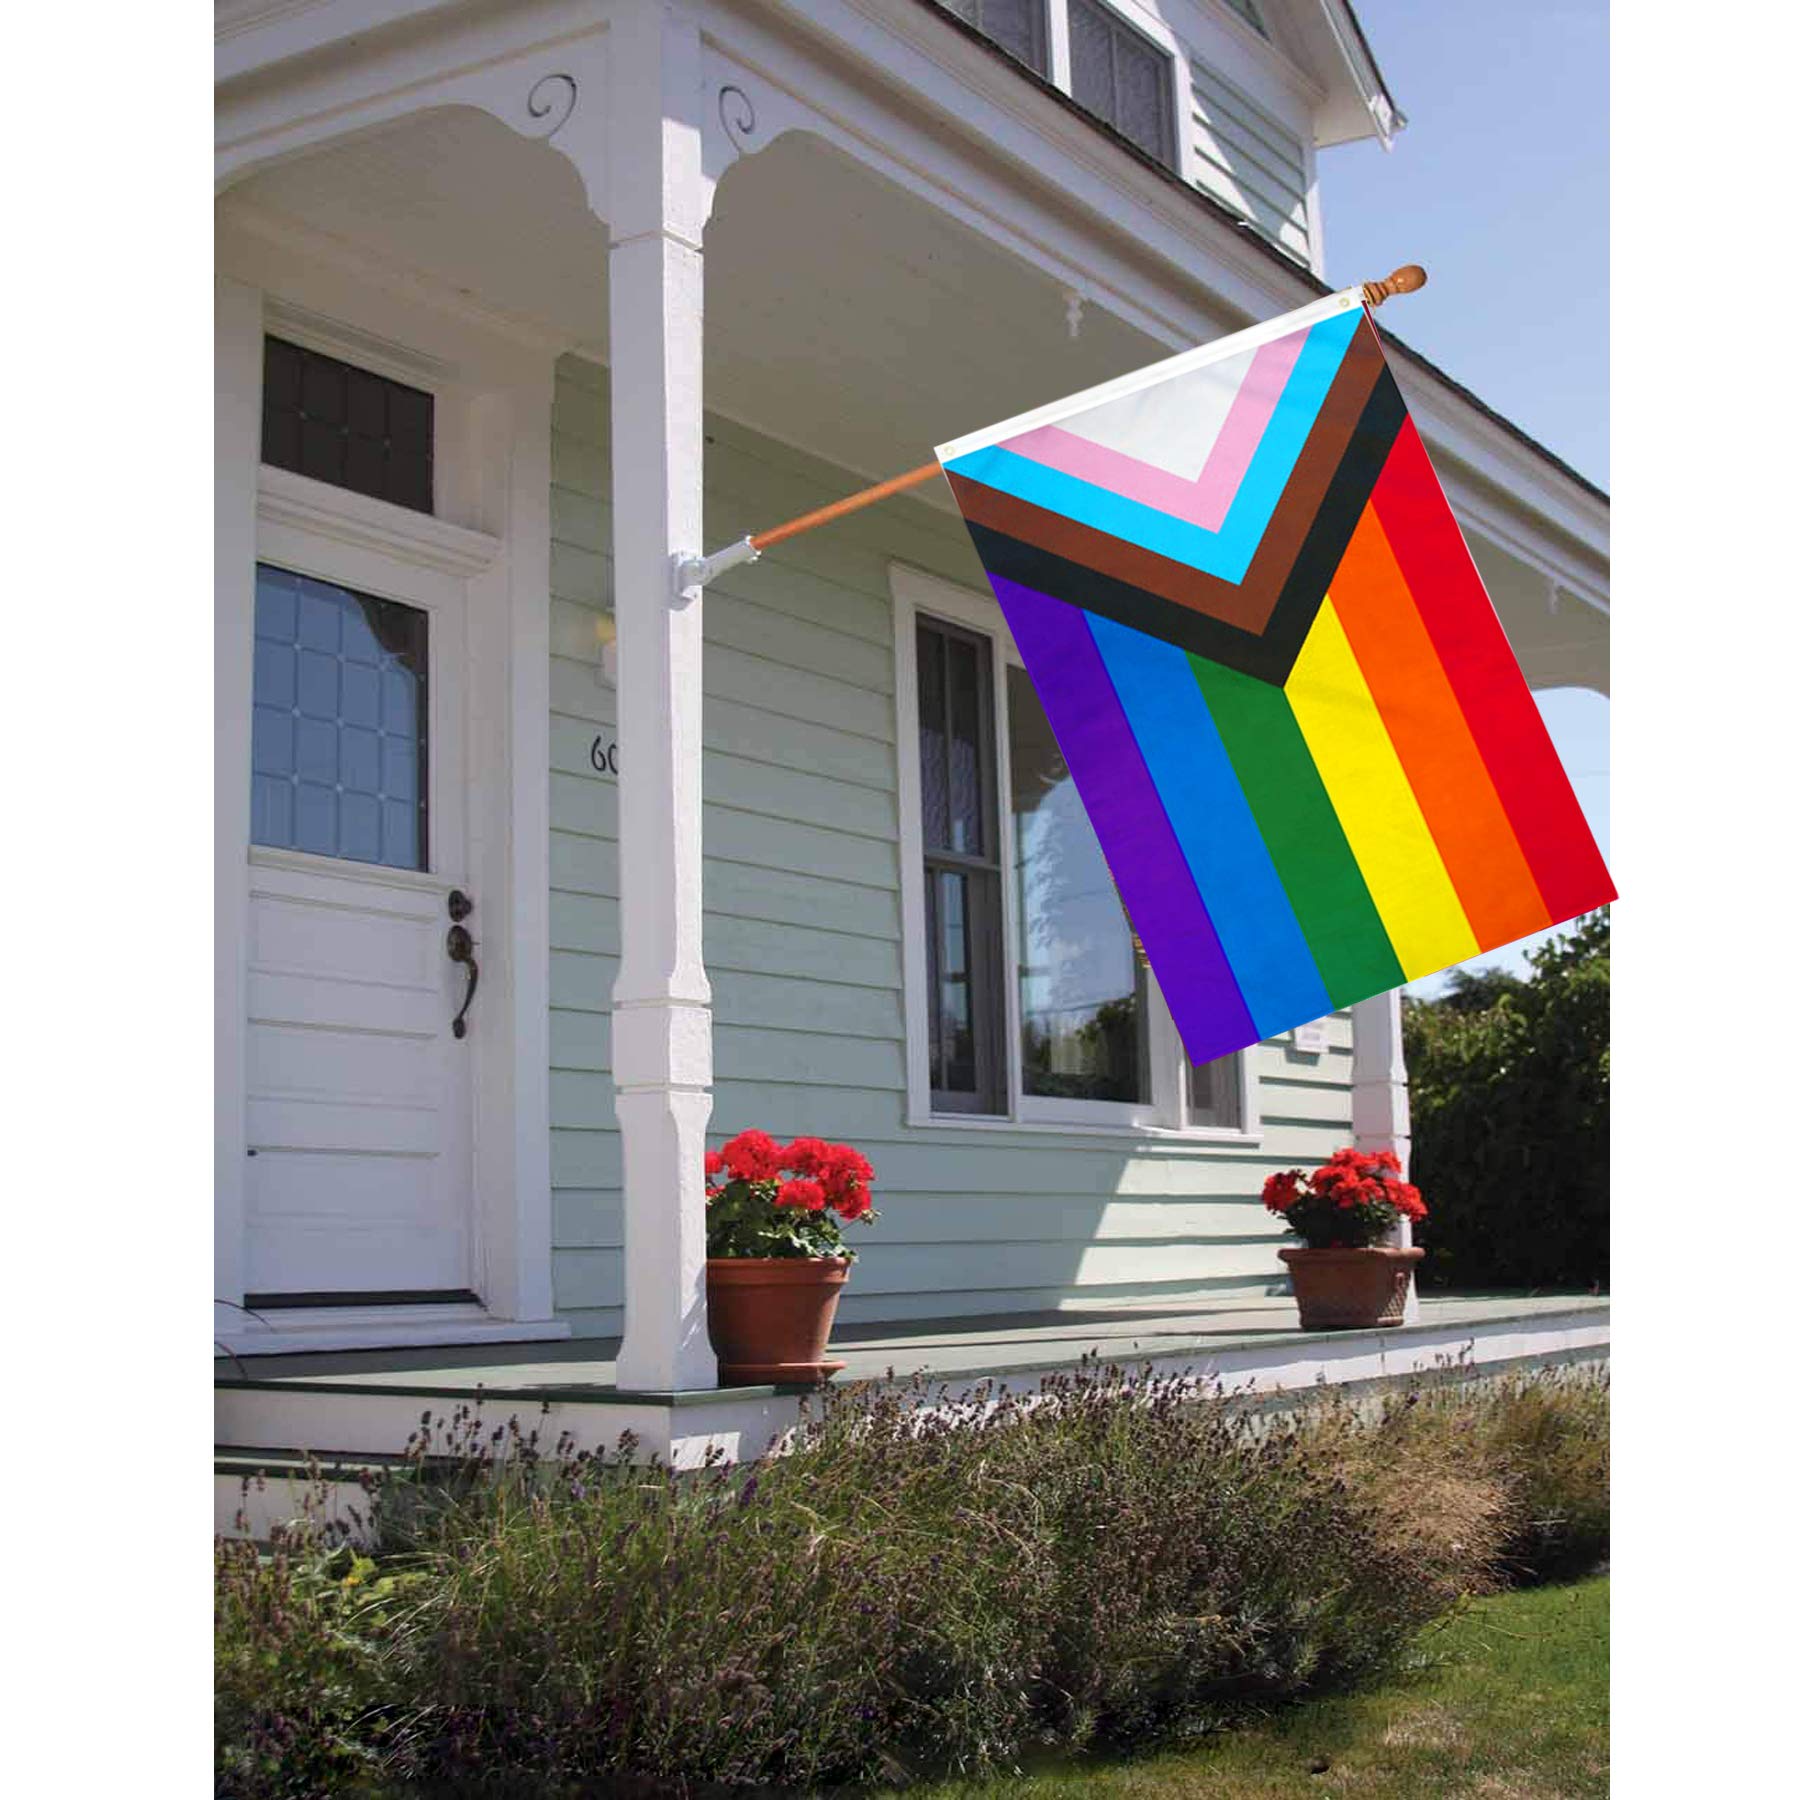 Progress Pride Rainbow Flag,3 x 5 Foot Progressive Pride Flag 100 D Polyester Outdoor Flag,Bright and Vivid Colors Bisexual Trans LGTBQ Community Gay Pride Banner,UV Fade with Brass Grommets